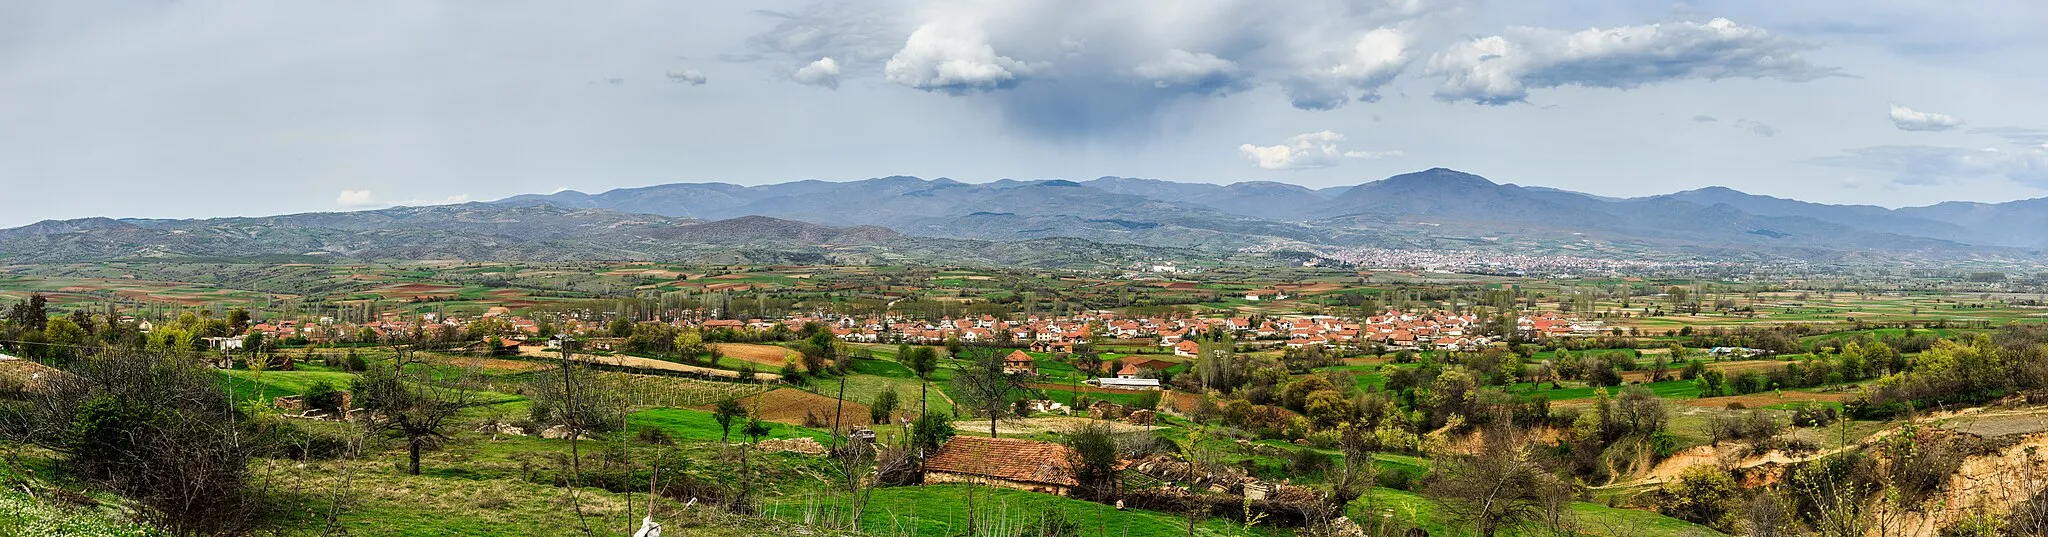 Photo showing: Panoramic view of the village of Injevo with the town of Radoviš in the background)